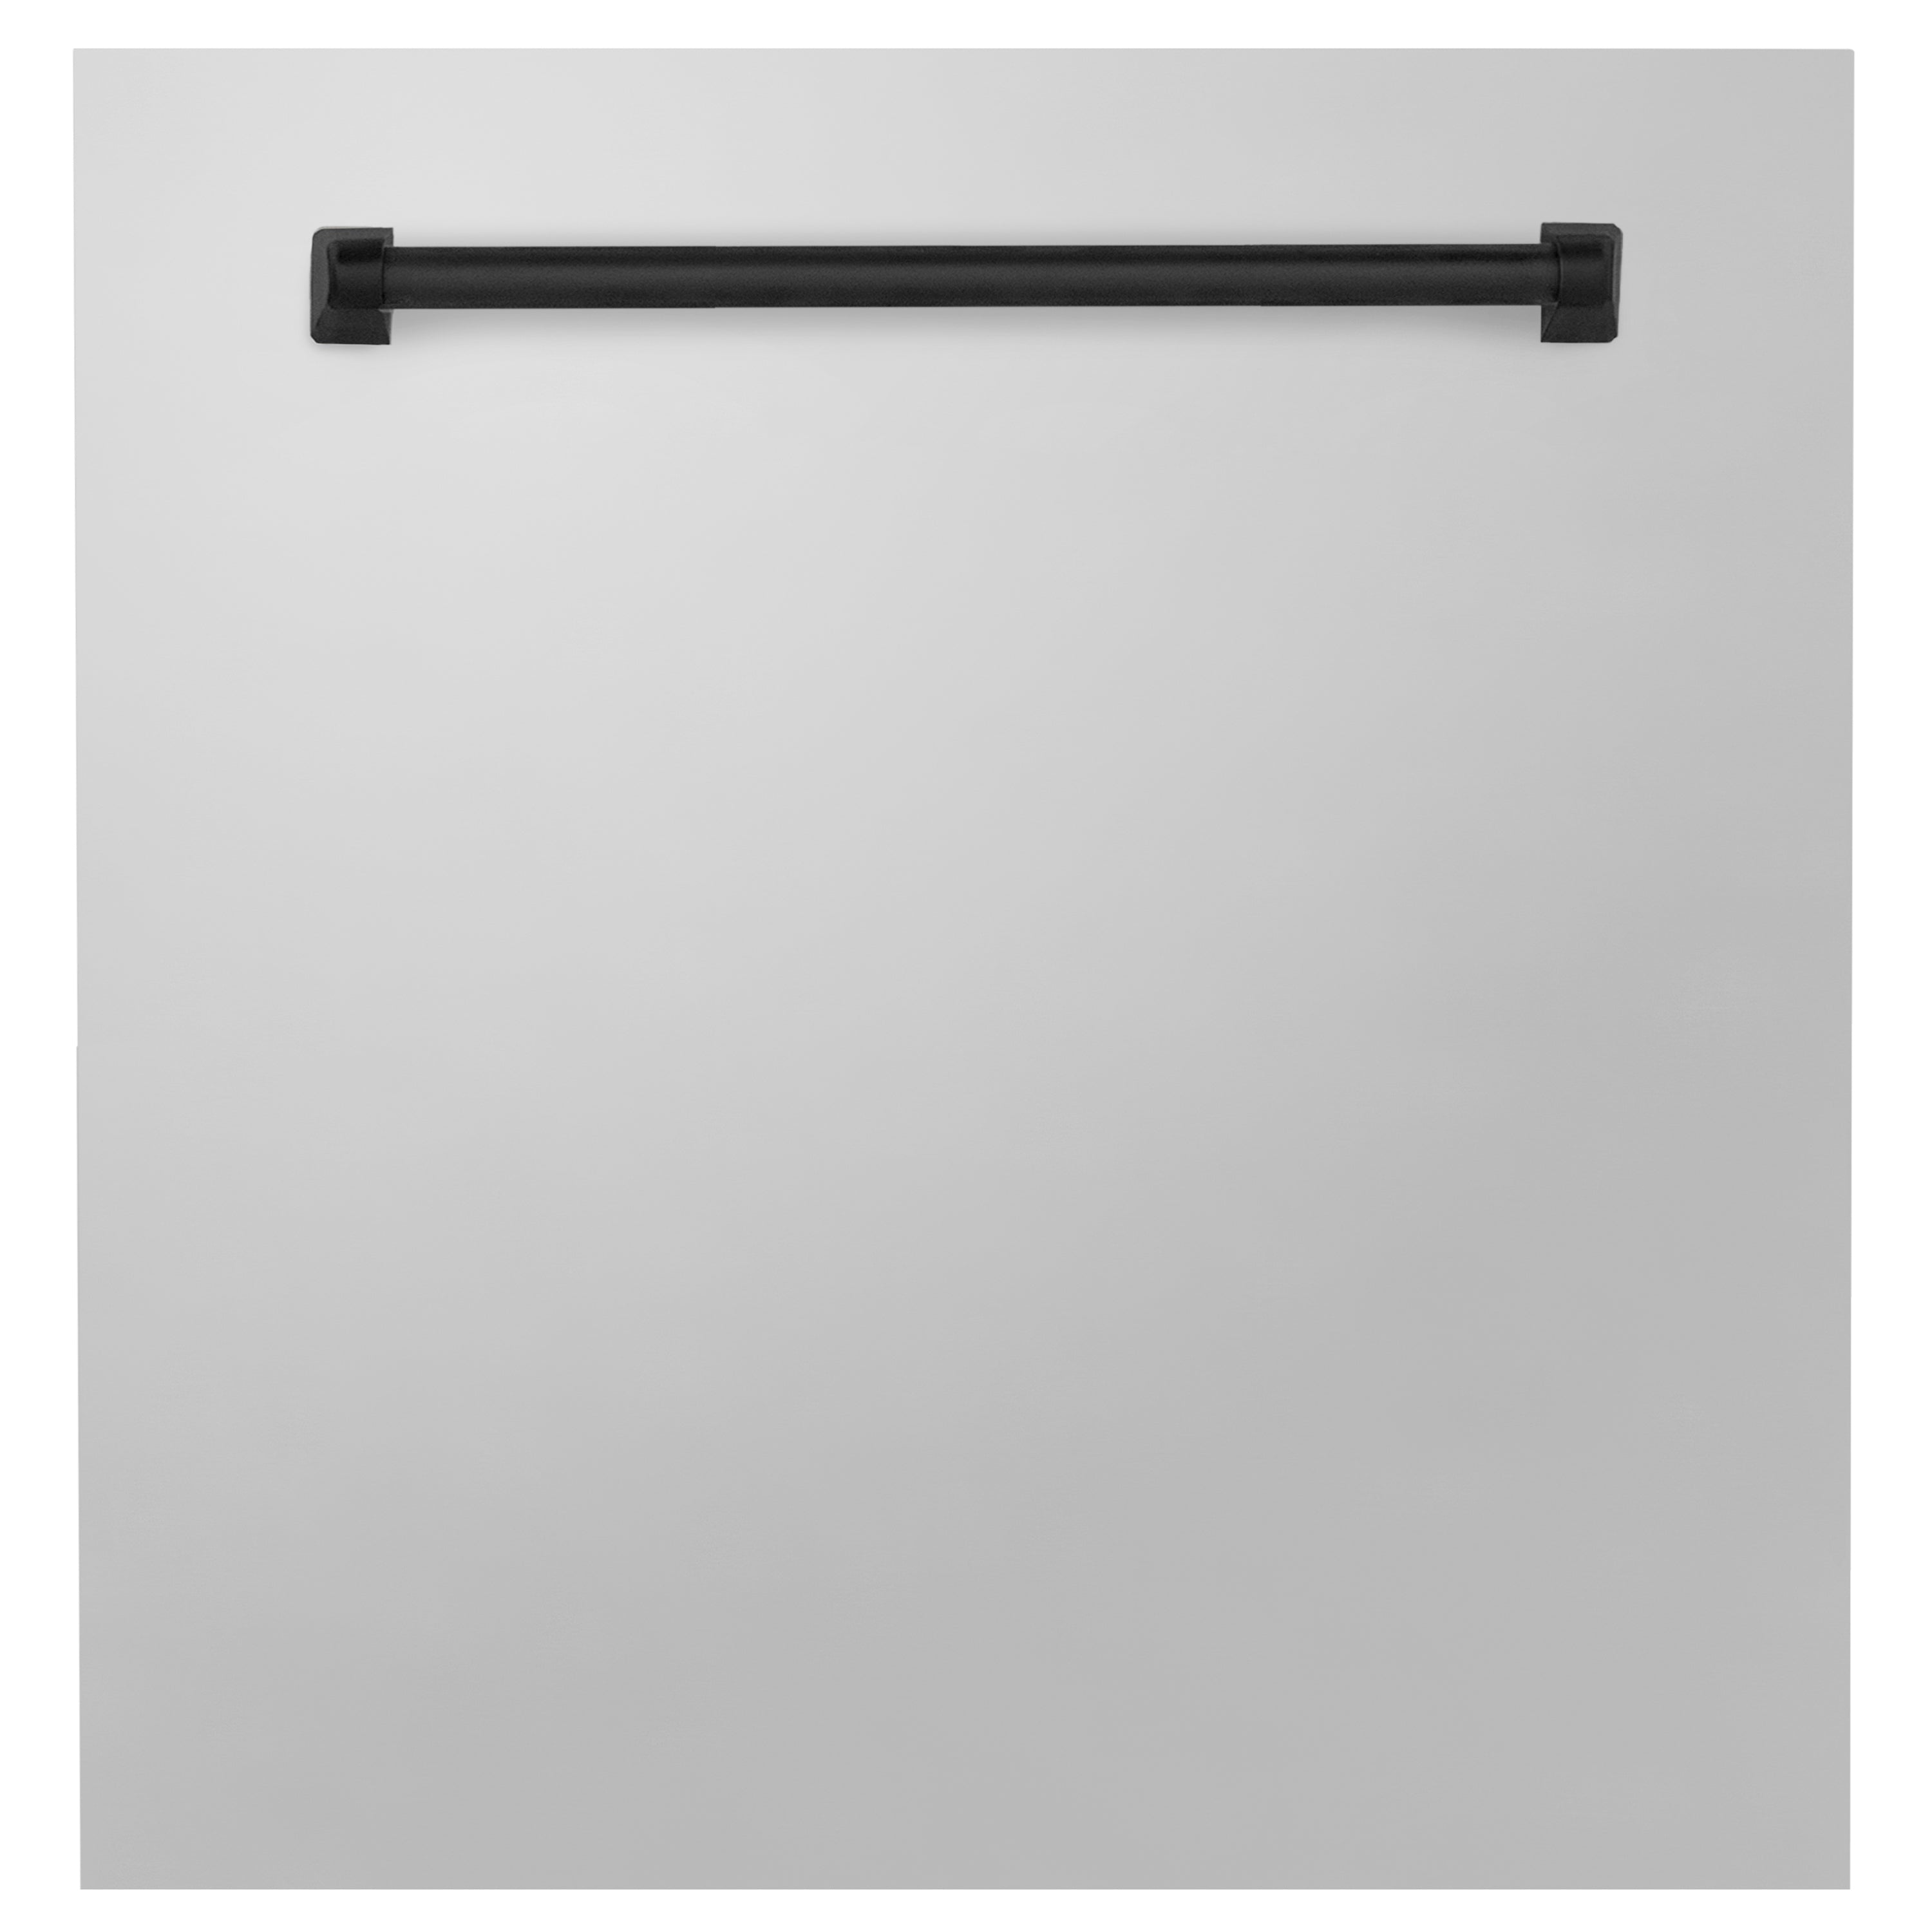 ZLINE 24" Autograph Edition Monument Dishwasher Panel in Stainless Steel with Matte Black Handle (DPMTZ-304-24-MB)